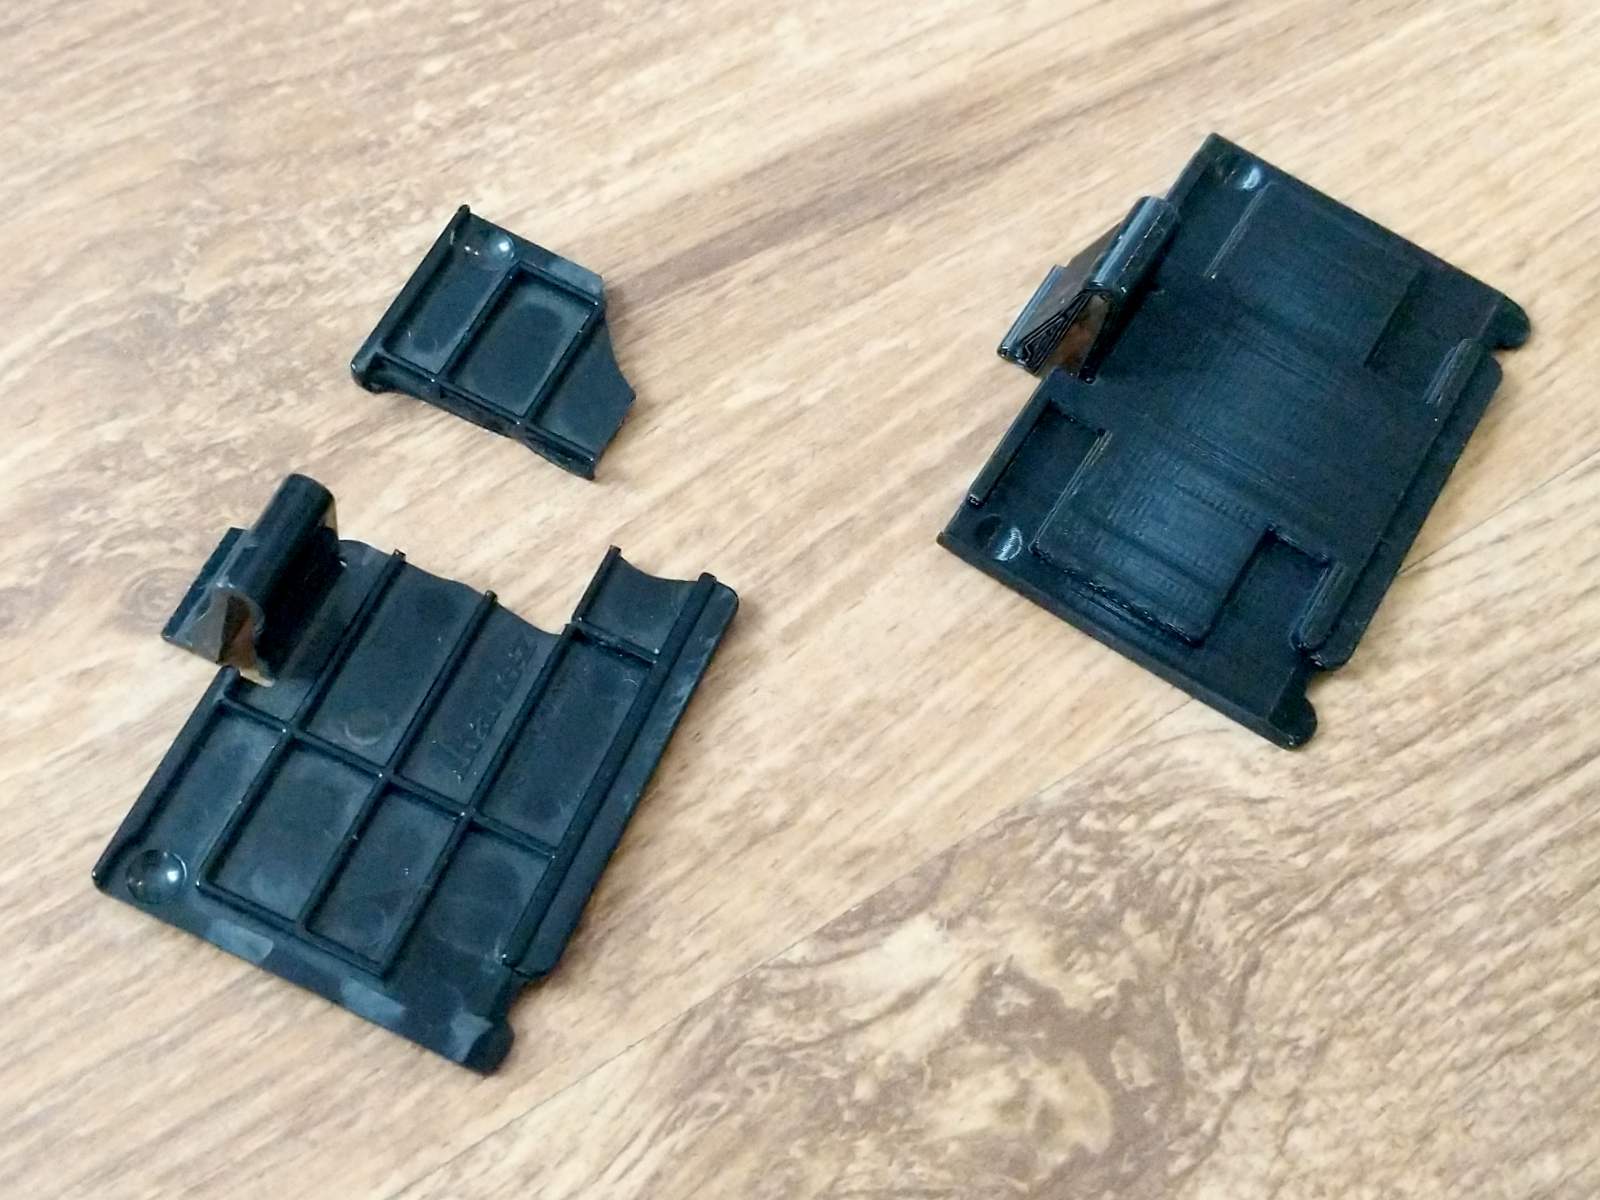 An original broken battery door next to a 3D printed replacement. Apart from a few changes to make it easier to print, they're more or less identical.